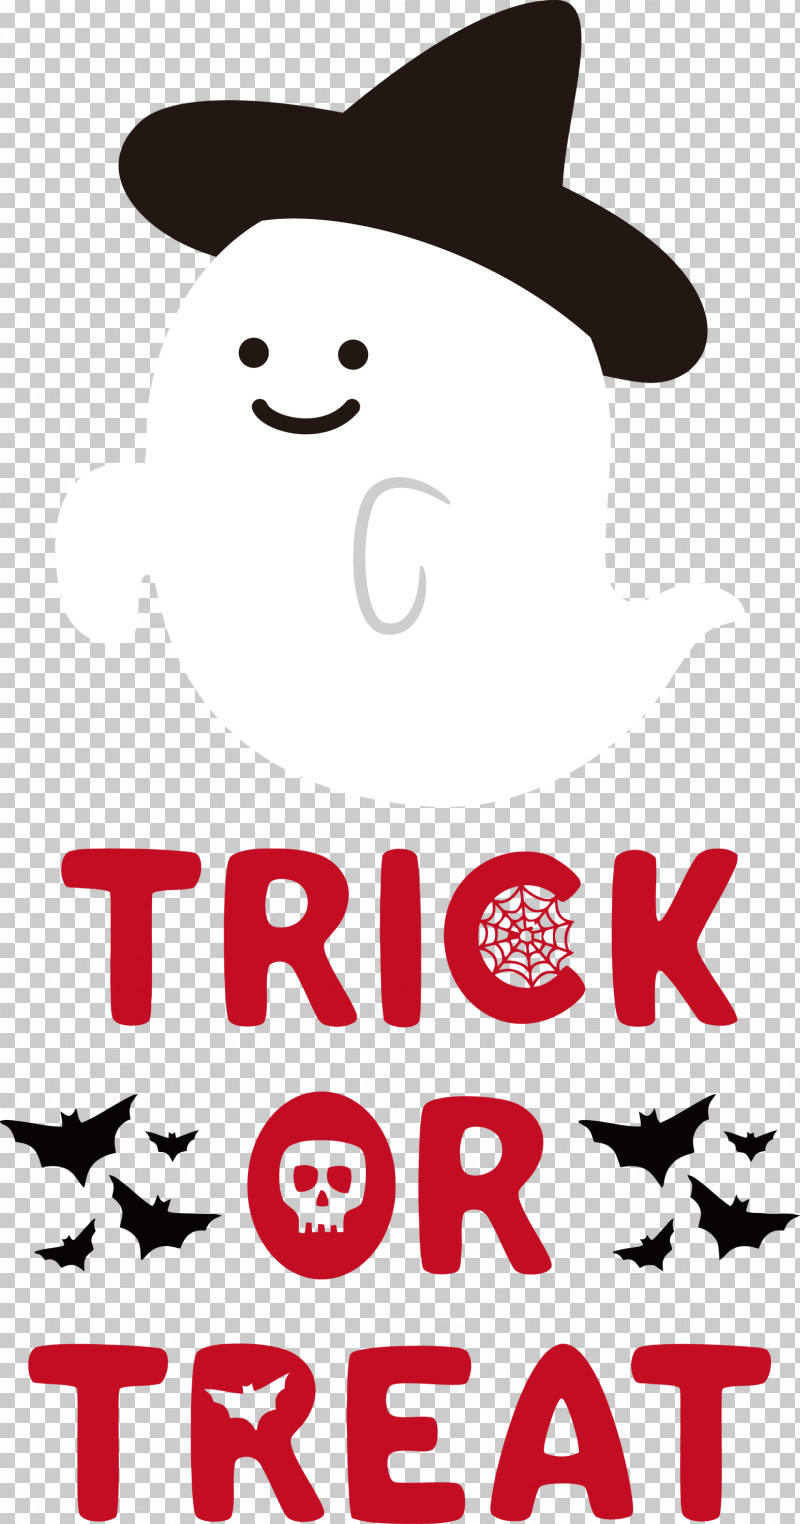 Trick Or Treat Halloween Trick-or-treating PNG, Clipart, Black, Black And White, Cartoon, Halloween, Happiness Free PNG Download